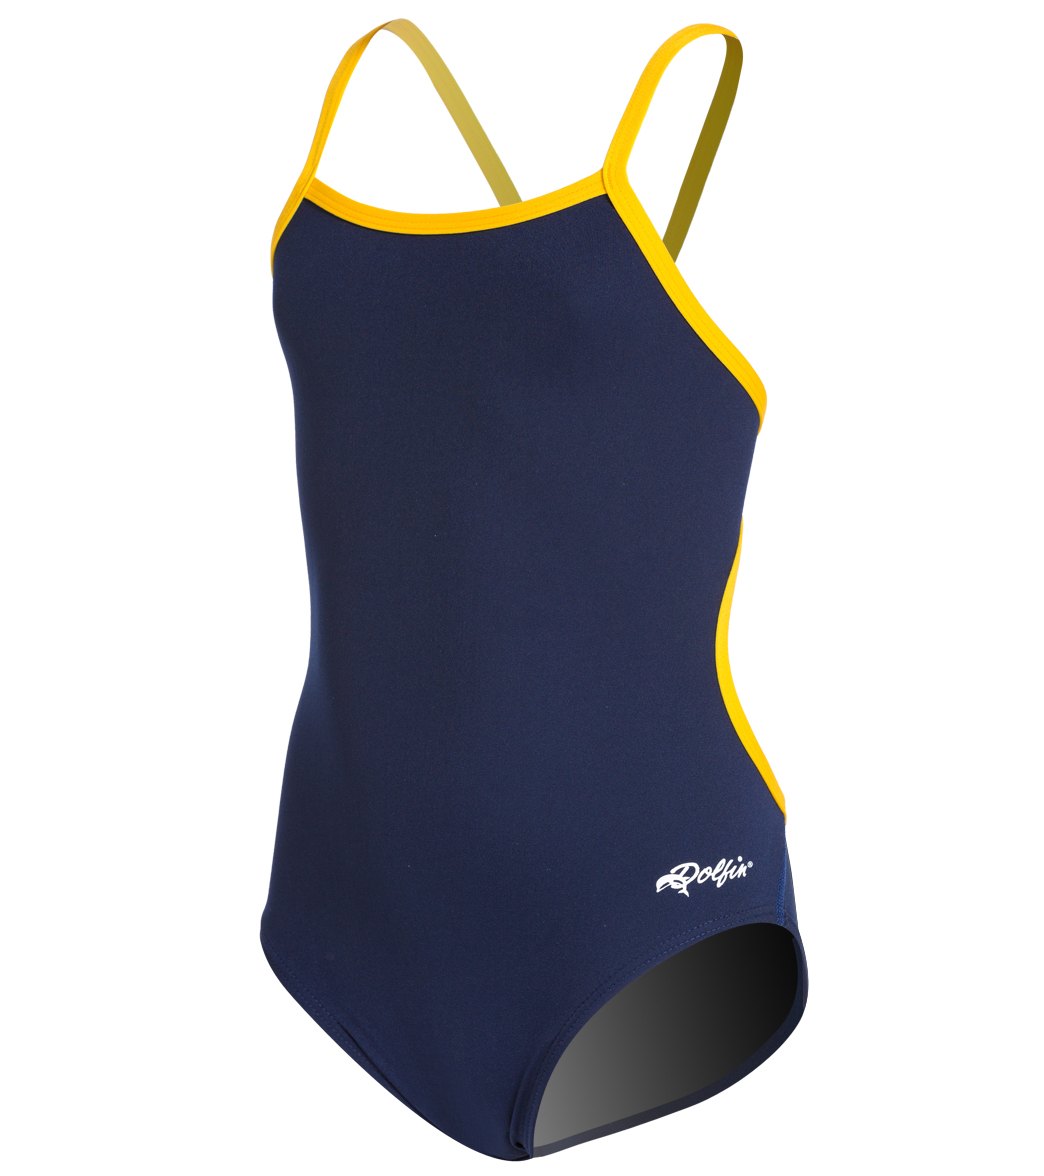 Dolfin Girls' All Poly Varsity Solid String Back One Piece Swimsuit - Navy/Gold 24 Polyester - Swimoutlet.com